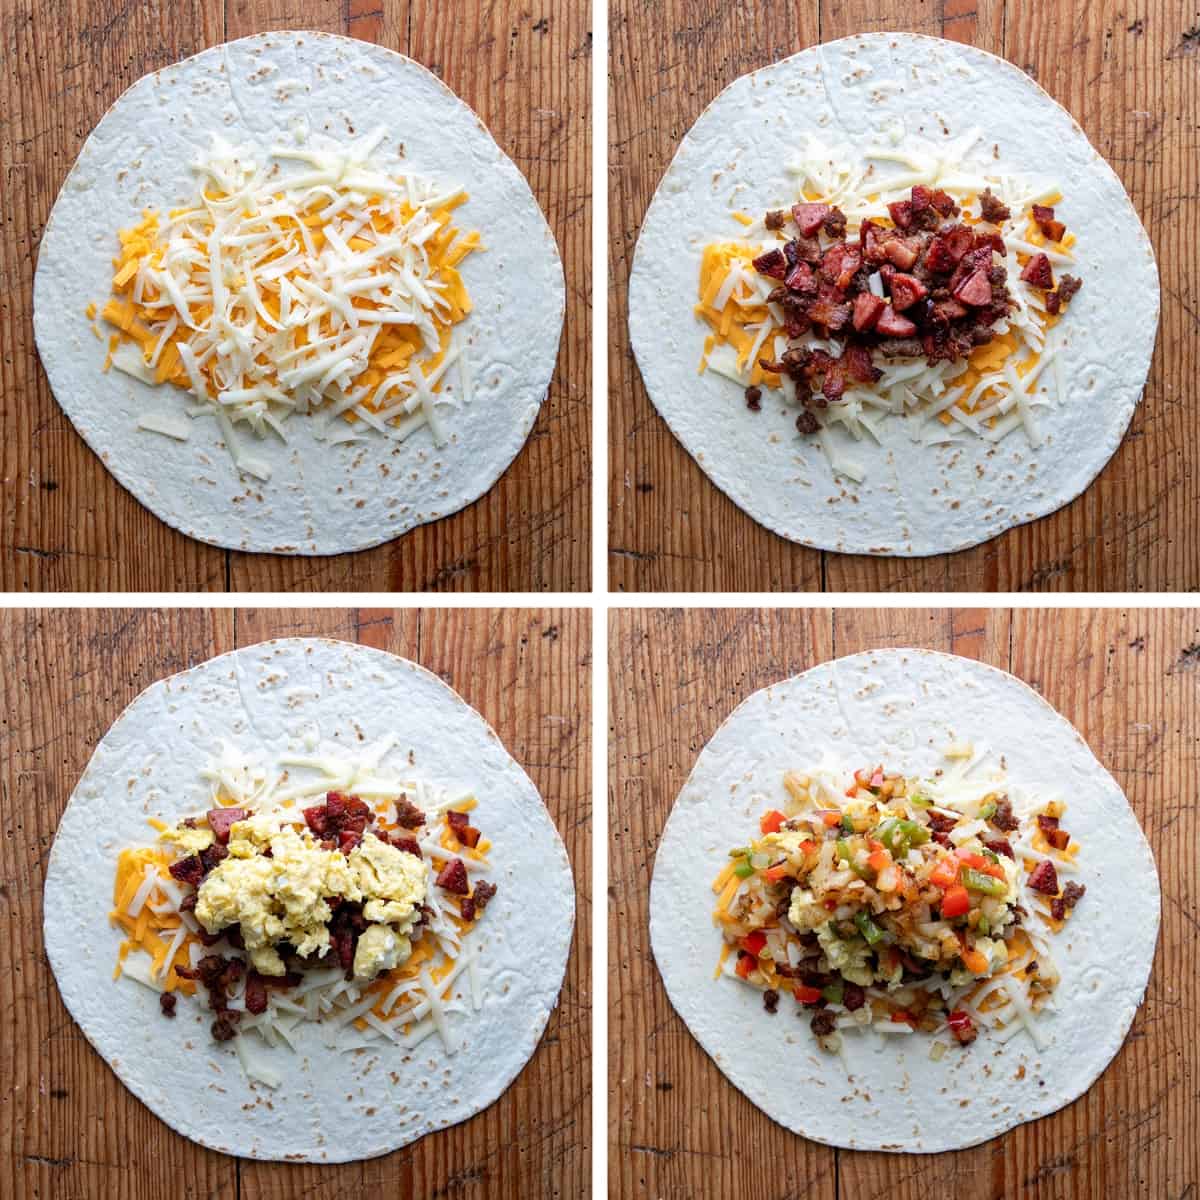 Steps for assembling a Cowboy Breakfast Burrito.